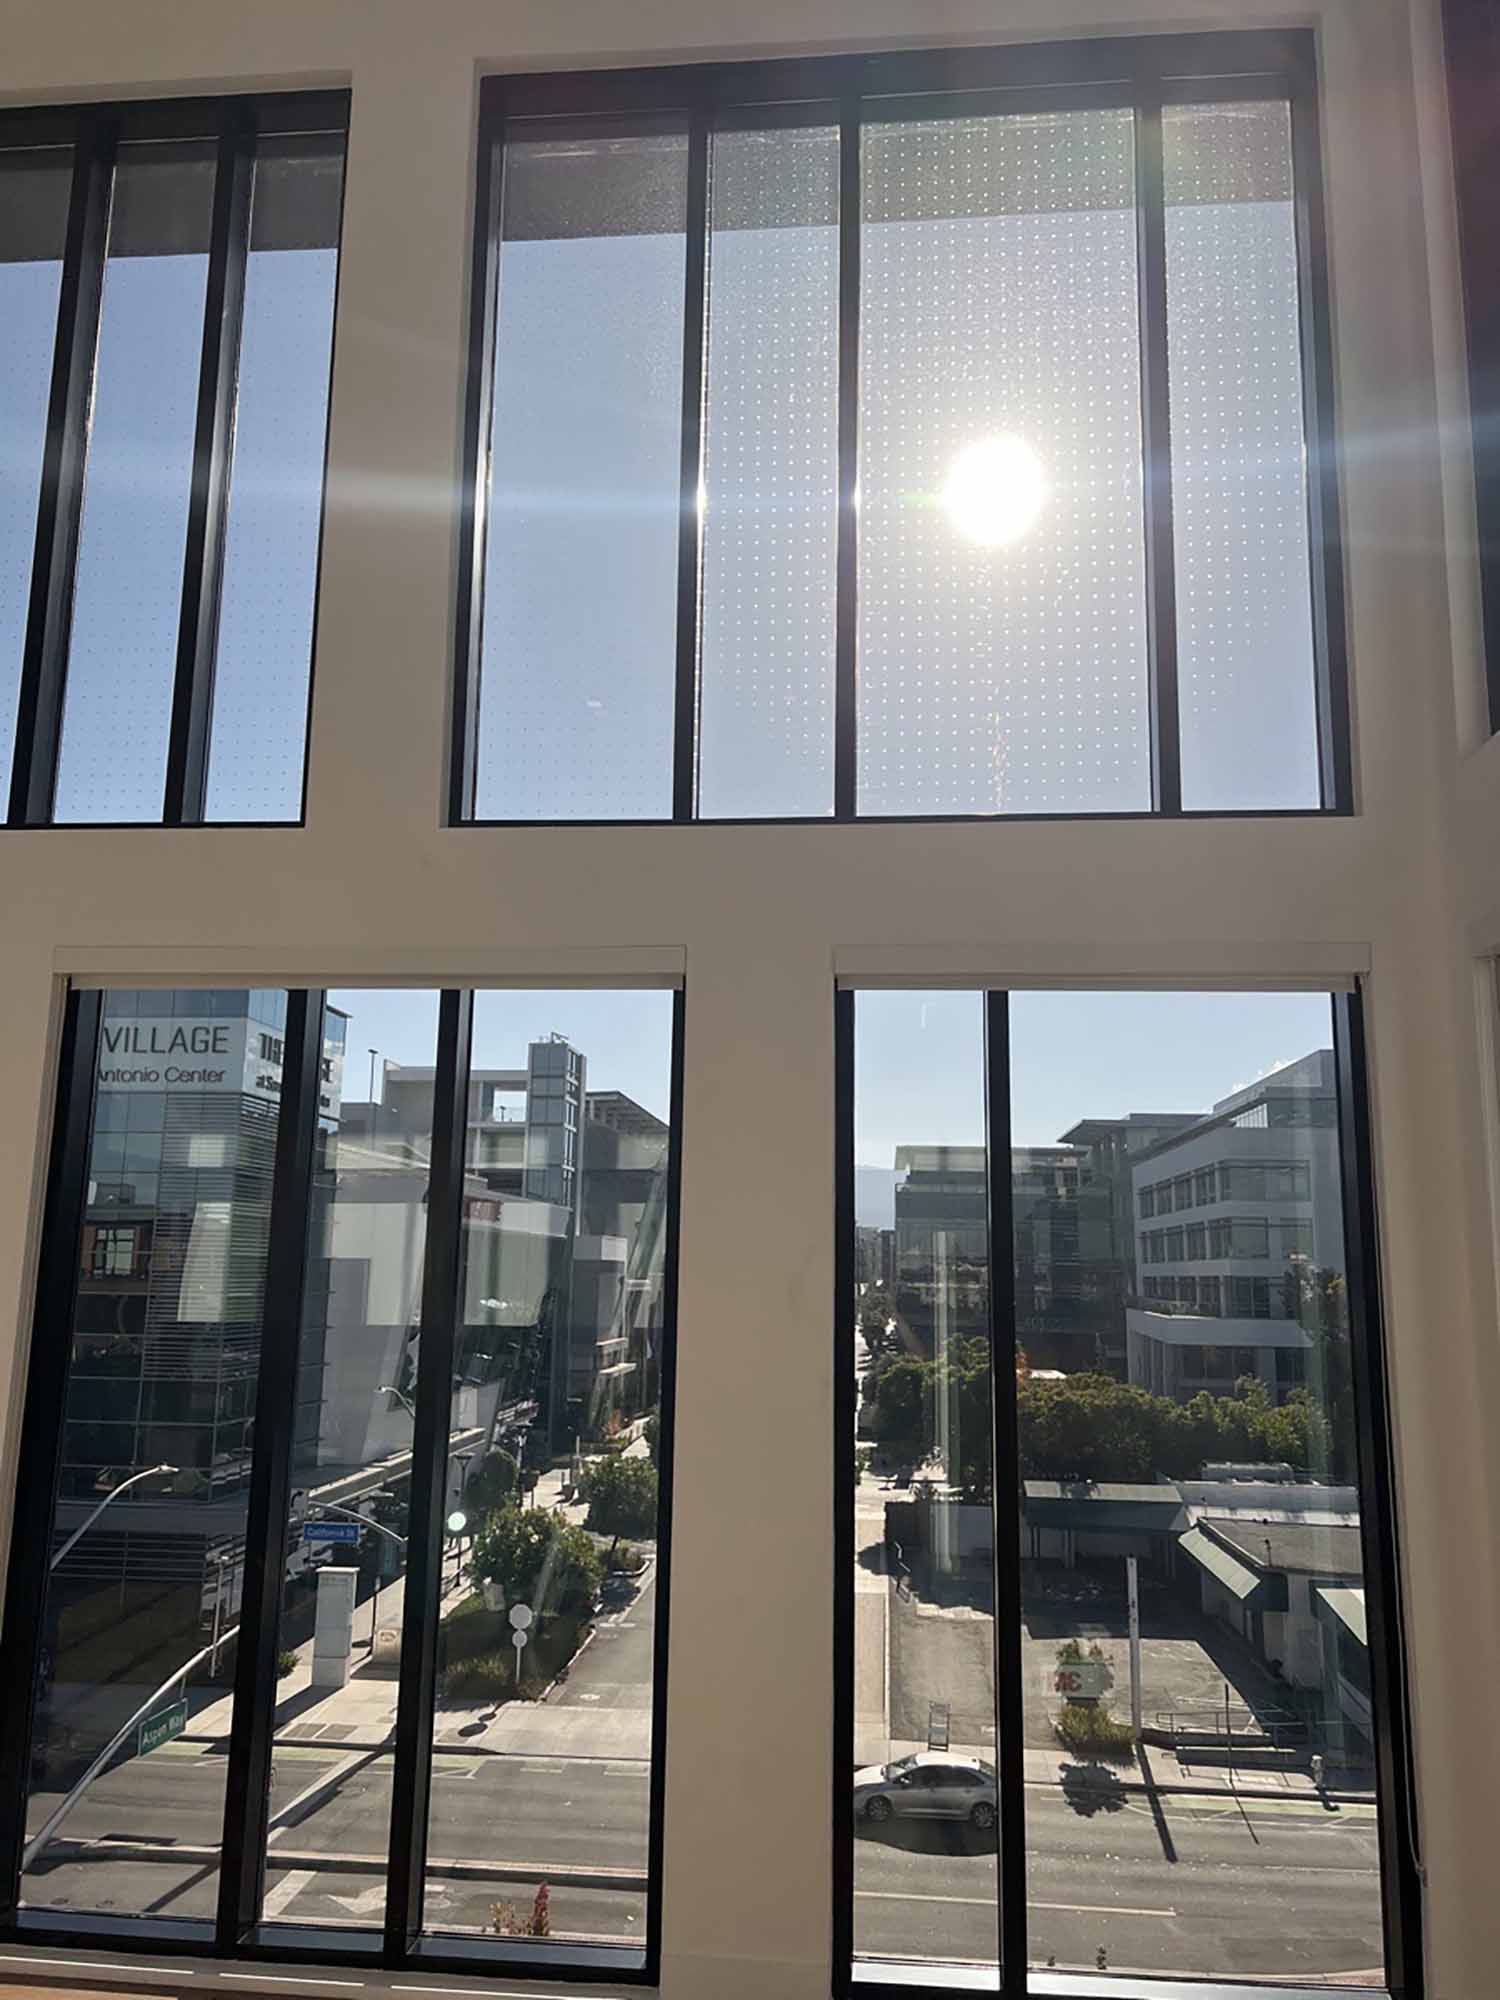 ClimatePro Installs 3M Sun Control Window Film for Mountain View, CA